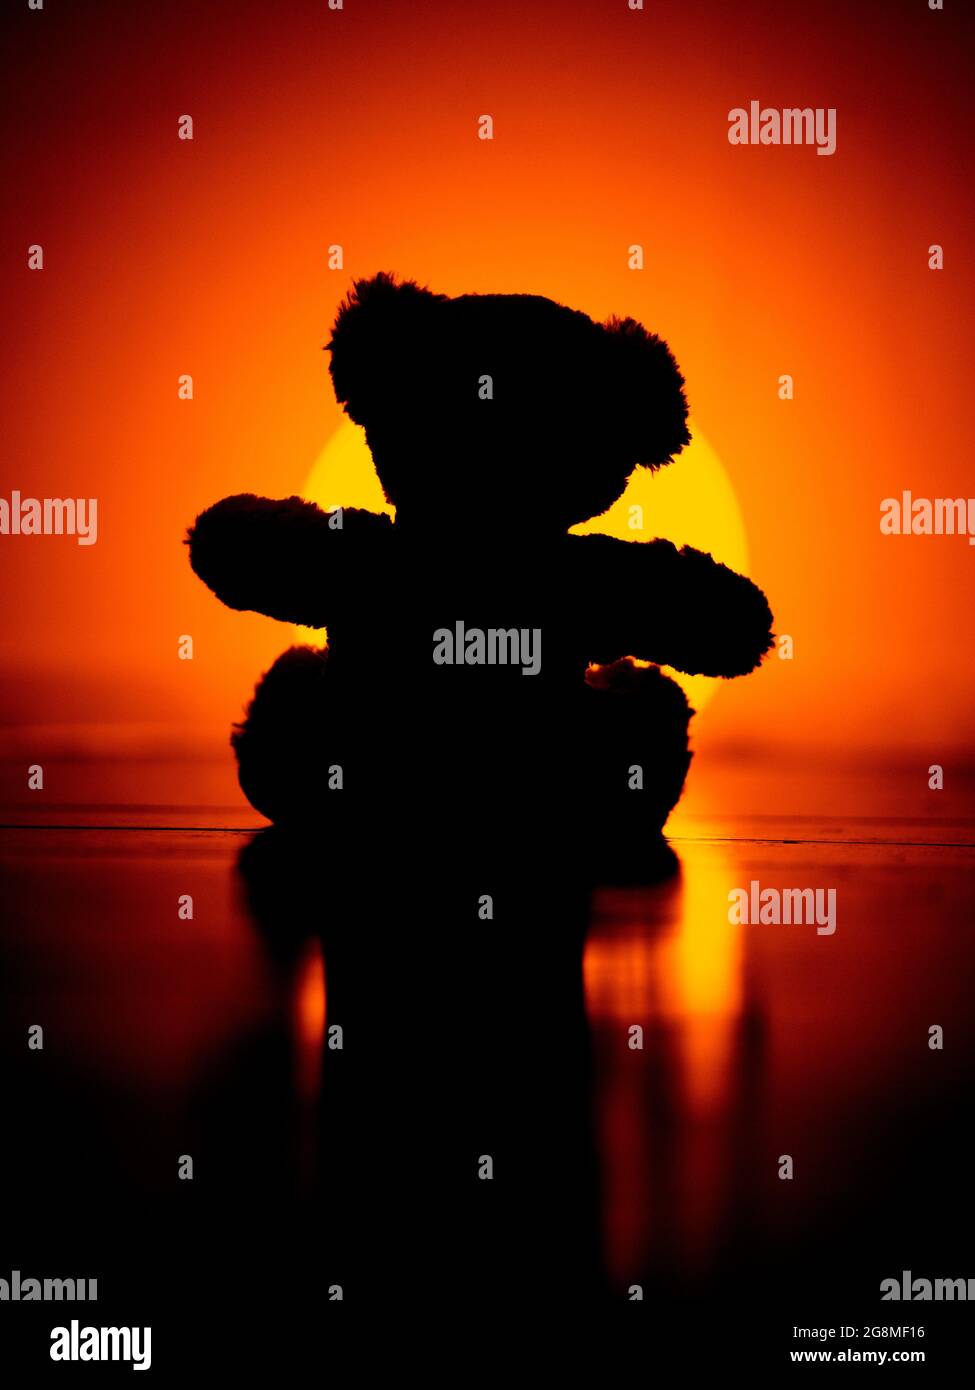 Book cover concept - Childhood - Silhouette of a teddy bear on the floor Stock Photo